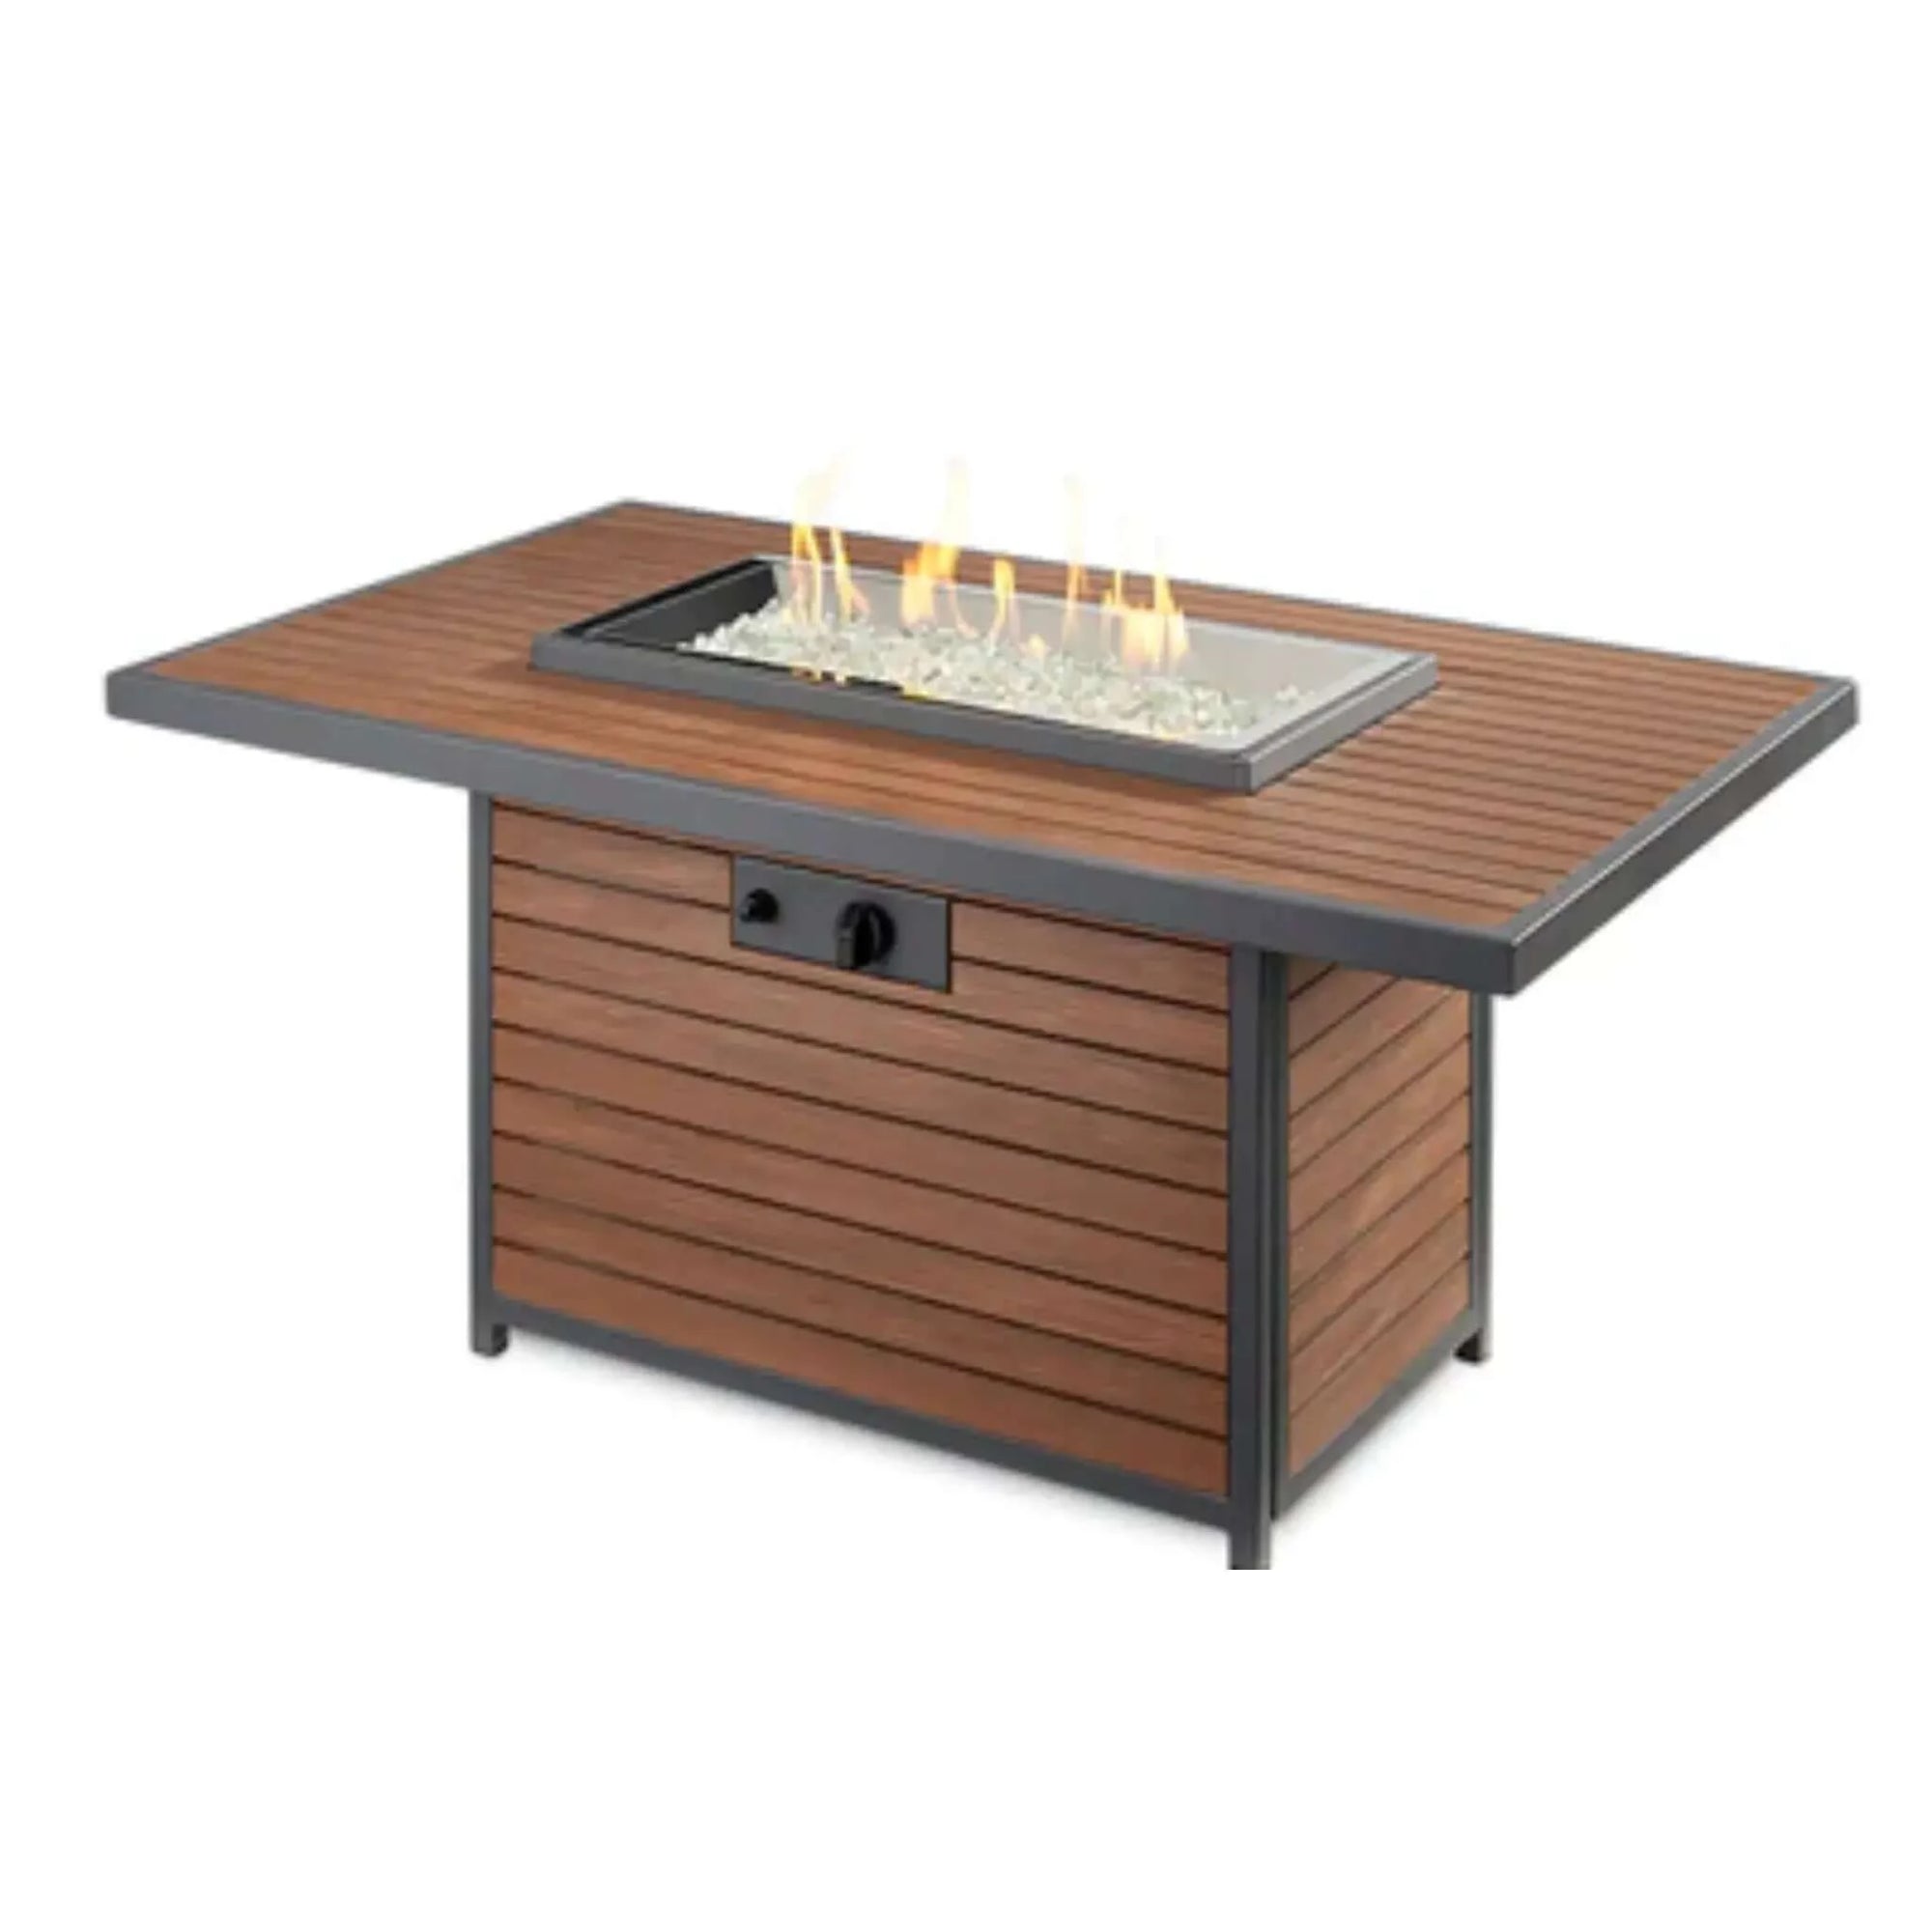 Outdoor GreatRoom Kenwood Rectangular Chat Height Gas Fire Pit Table-Liquid Propane